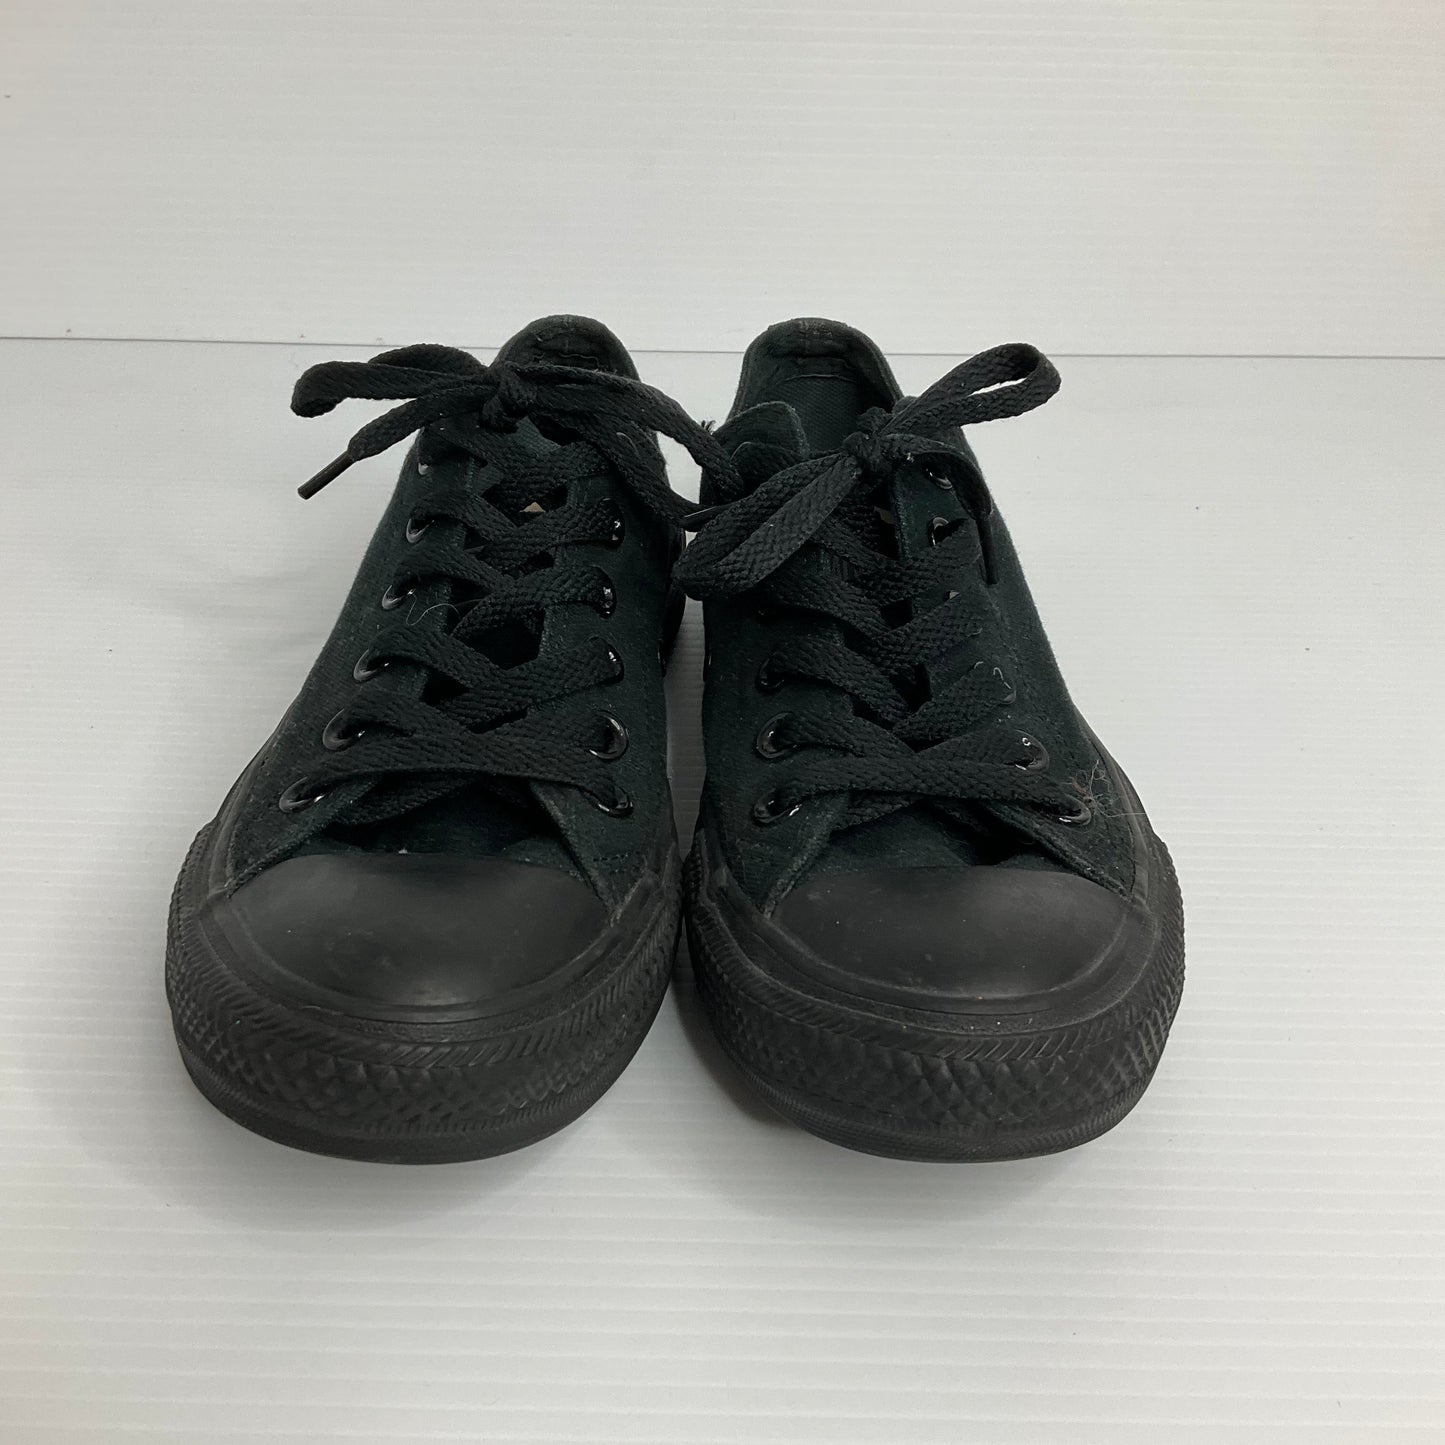 Black Shoes Sneakers Converse, Size 7